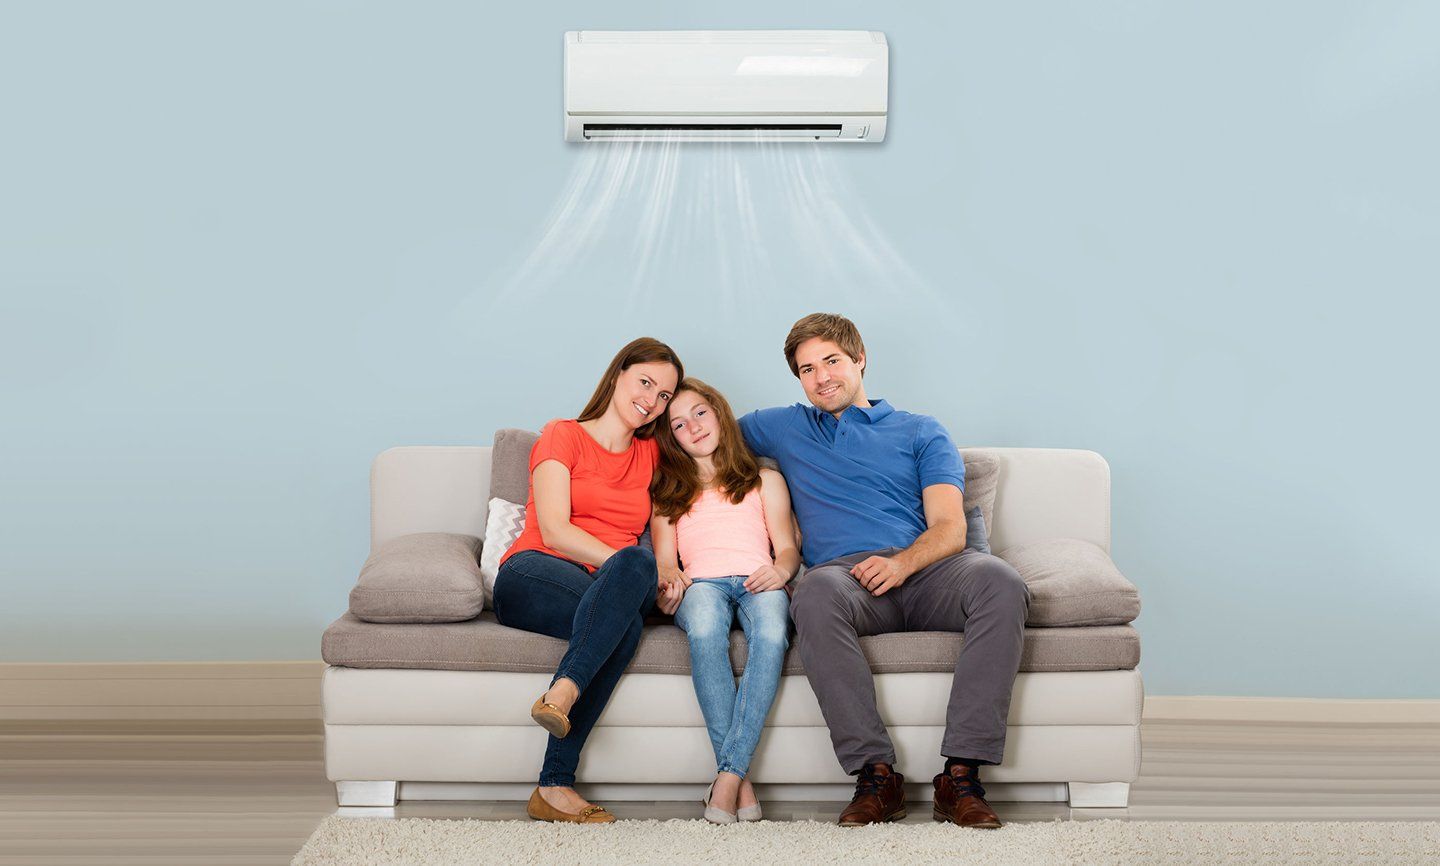 Family using air conditioner